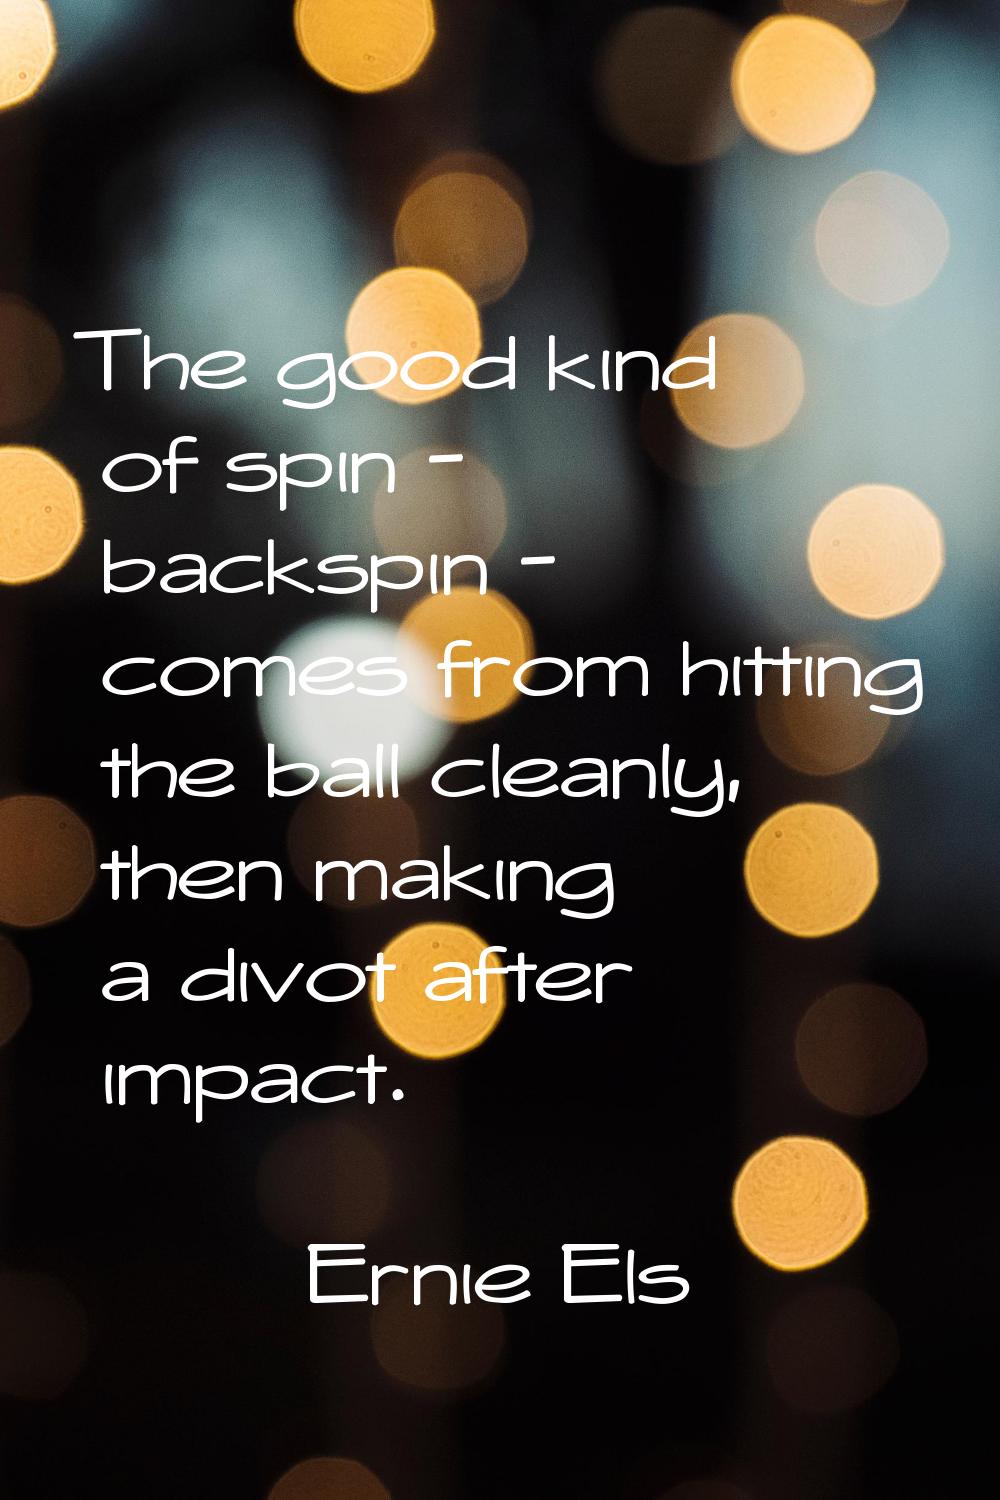 The good kind of spin - backspin - comes from hitting the ball cleanly, then making a divot after i